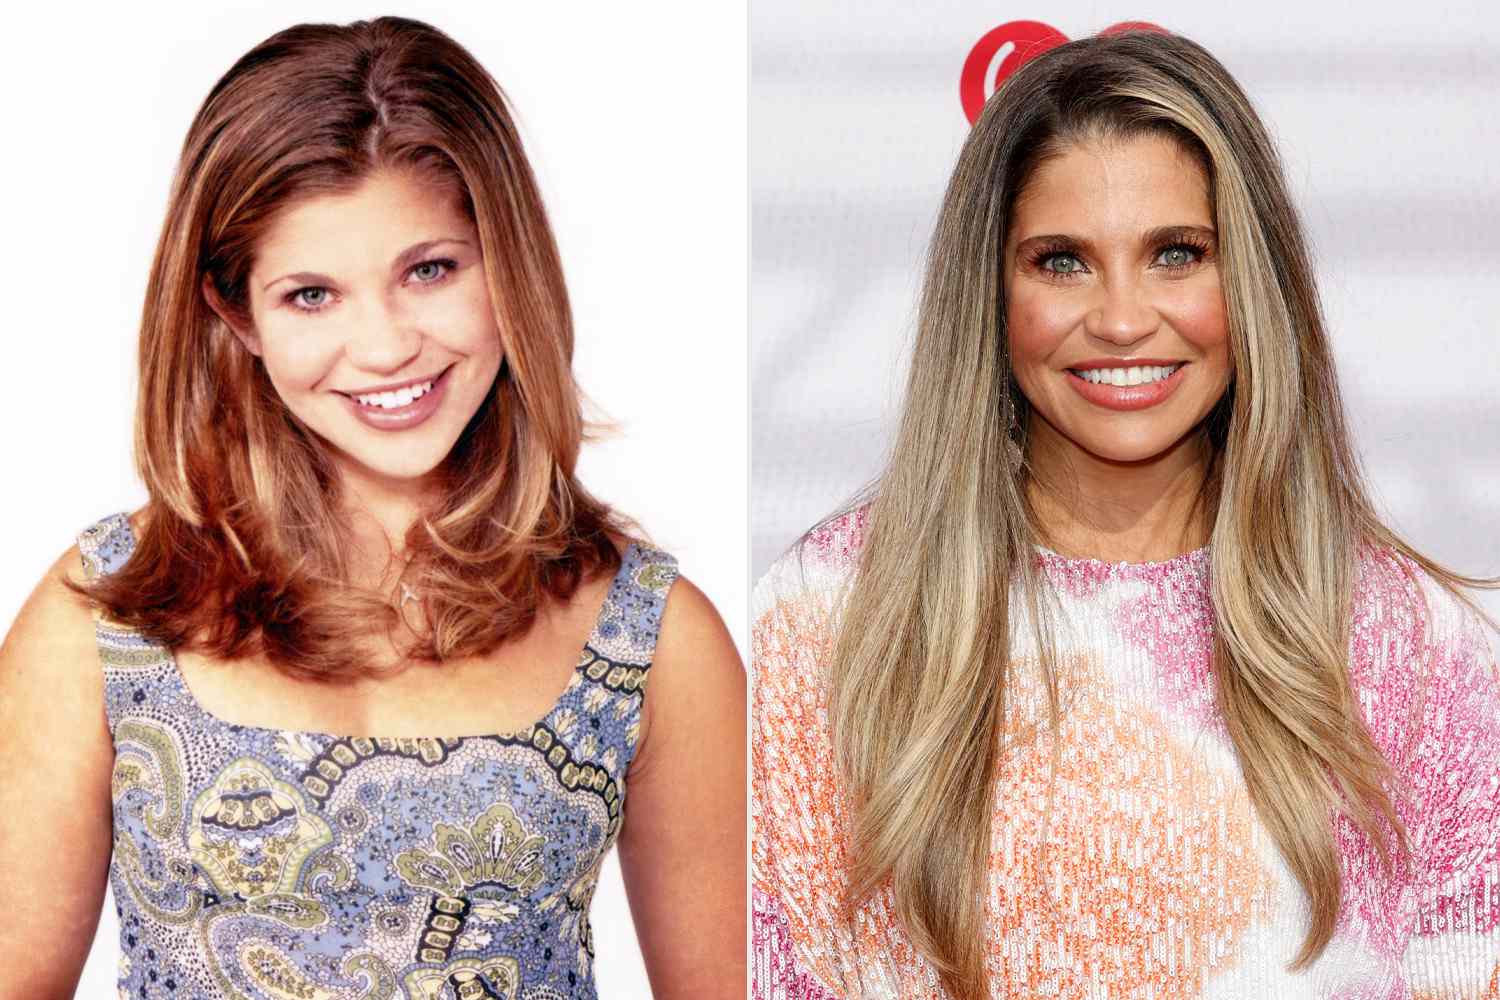 Danielle Fishel BOY MEETS WORLD, US actress Danielle Fishel arrives to attend iHeartRadio's KIIS FM Wango Tango at The Dignity Health Sports Park in Los Angeles on June 4, 2022. 